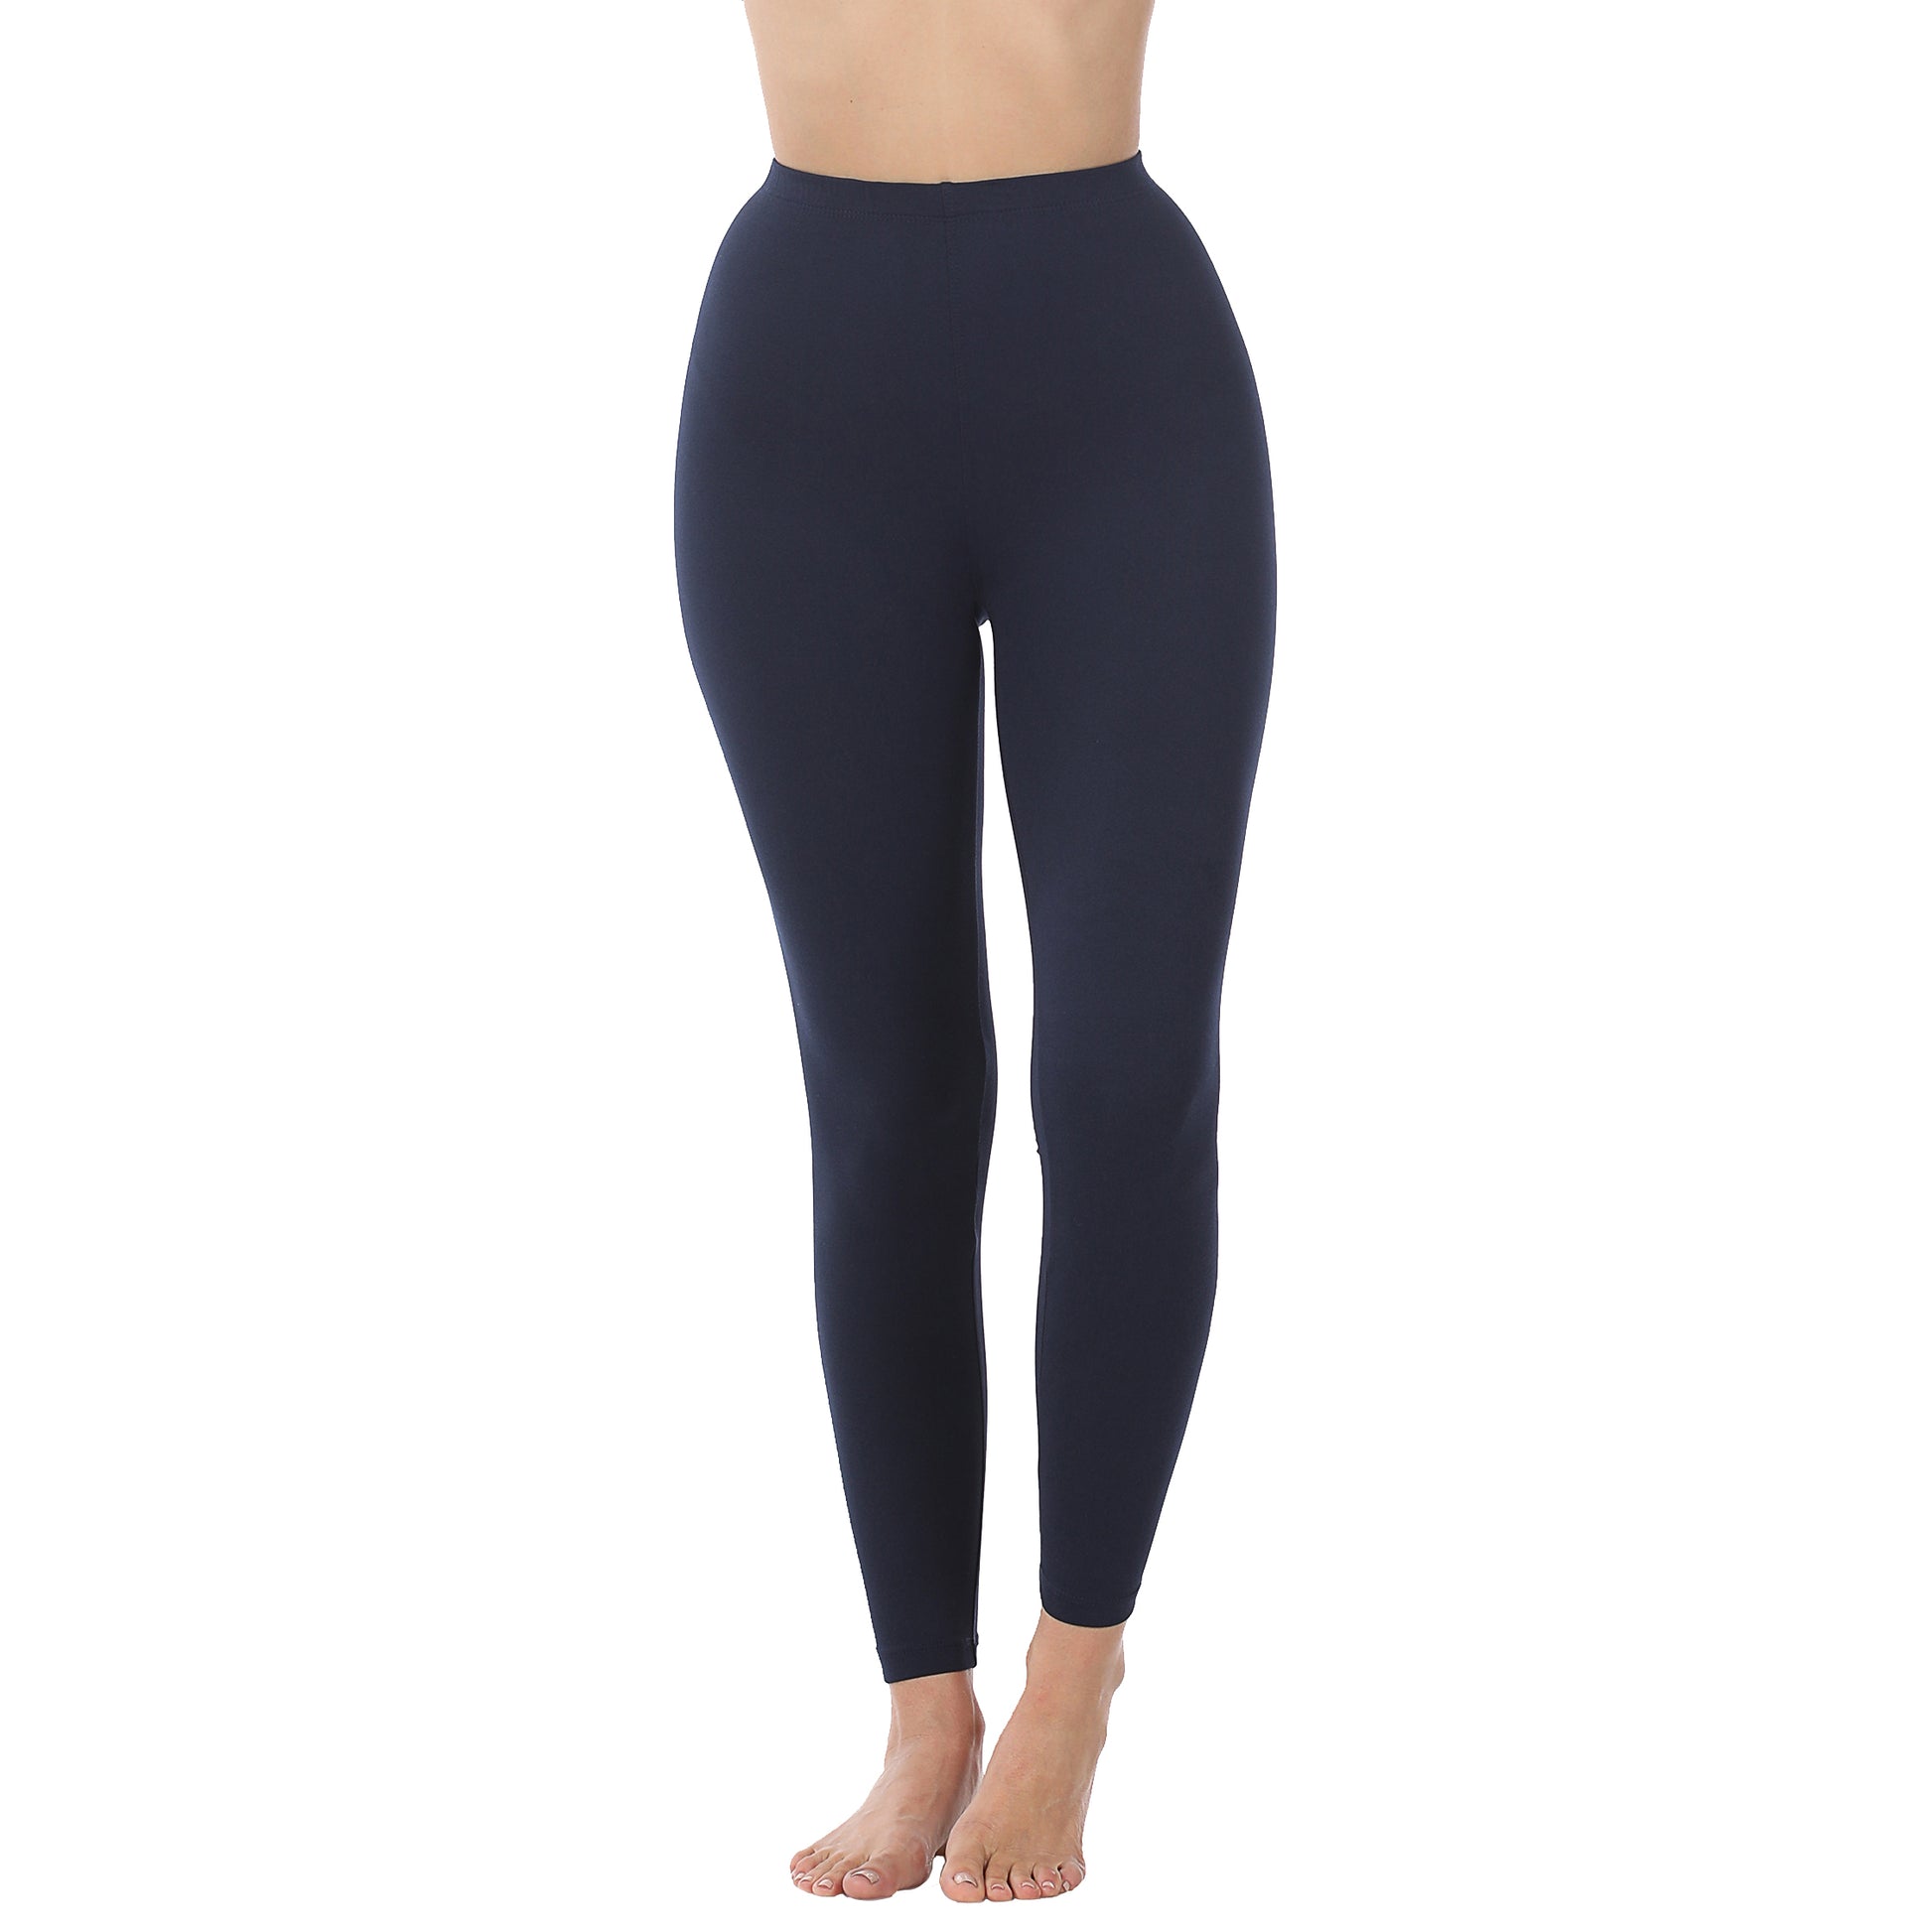  ZFLL Leggings,Shinny Legging Trousers Women High Elastic  Fitness Female Polyester Ankle-Length Breathable New Pants,K036 Navy Blue,XL  : Clothing, Shoes & Jewelry